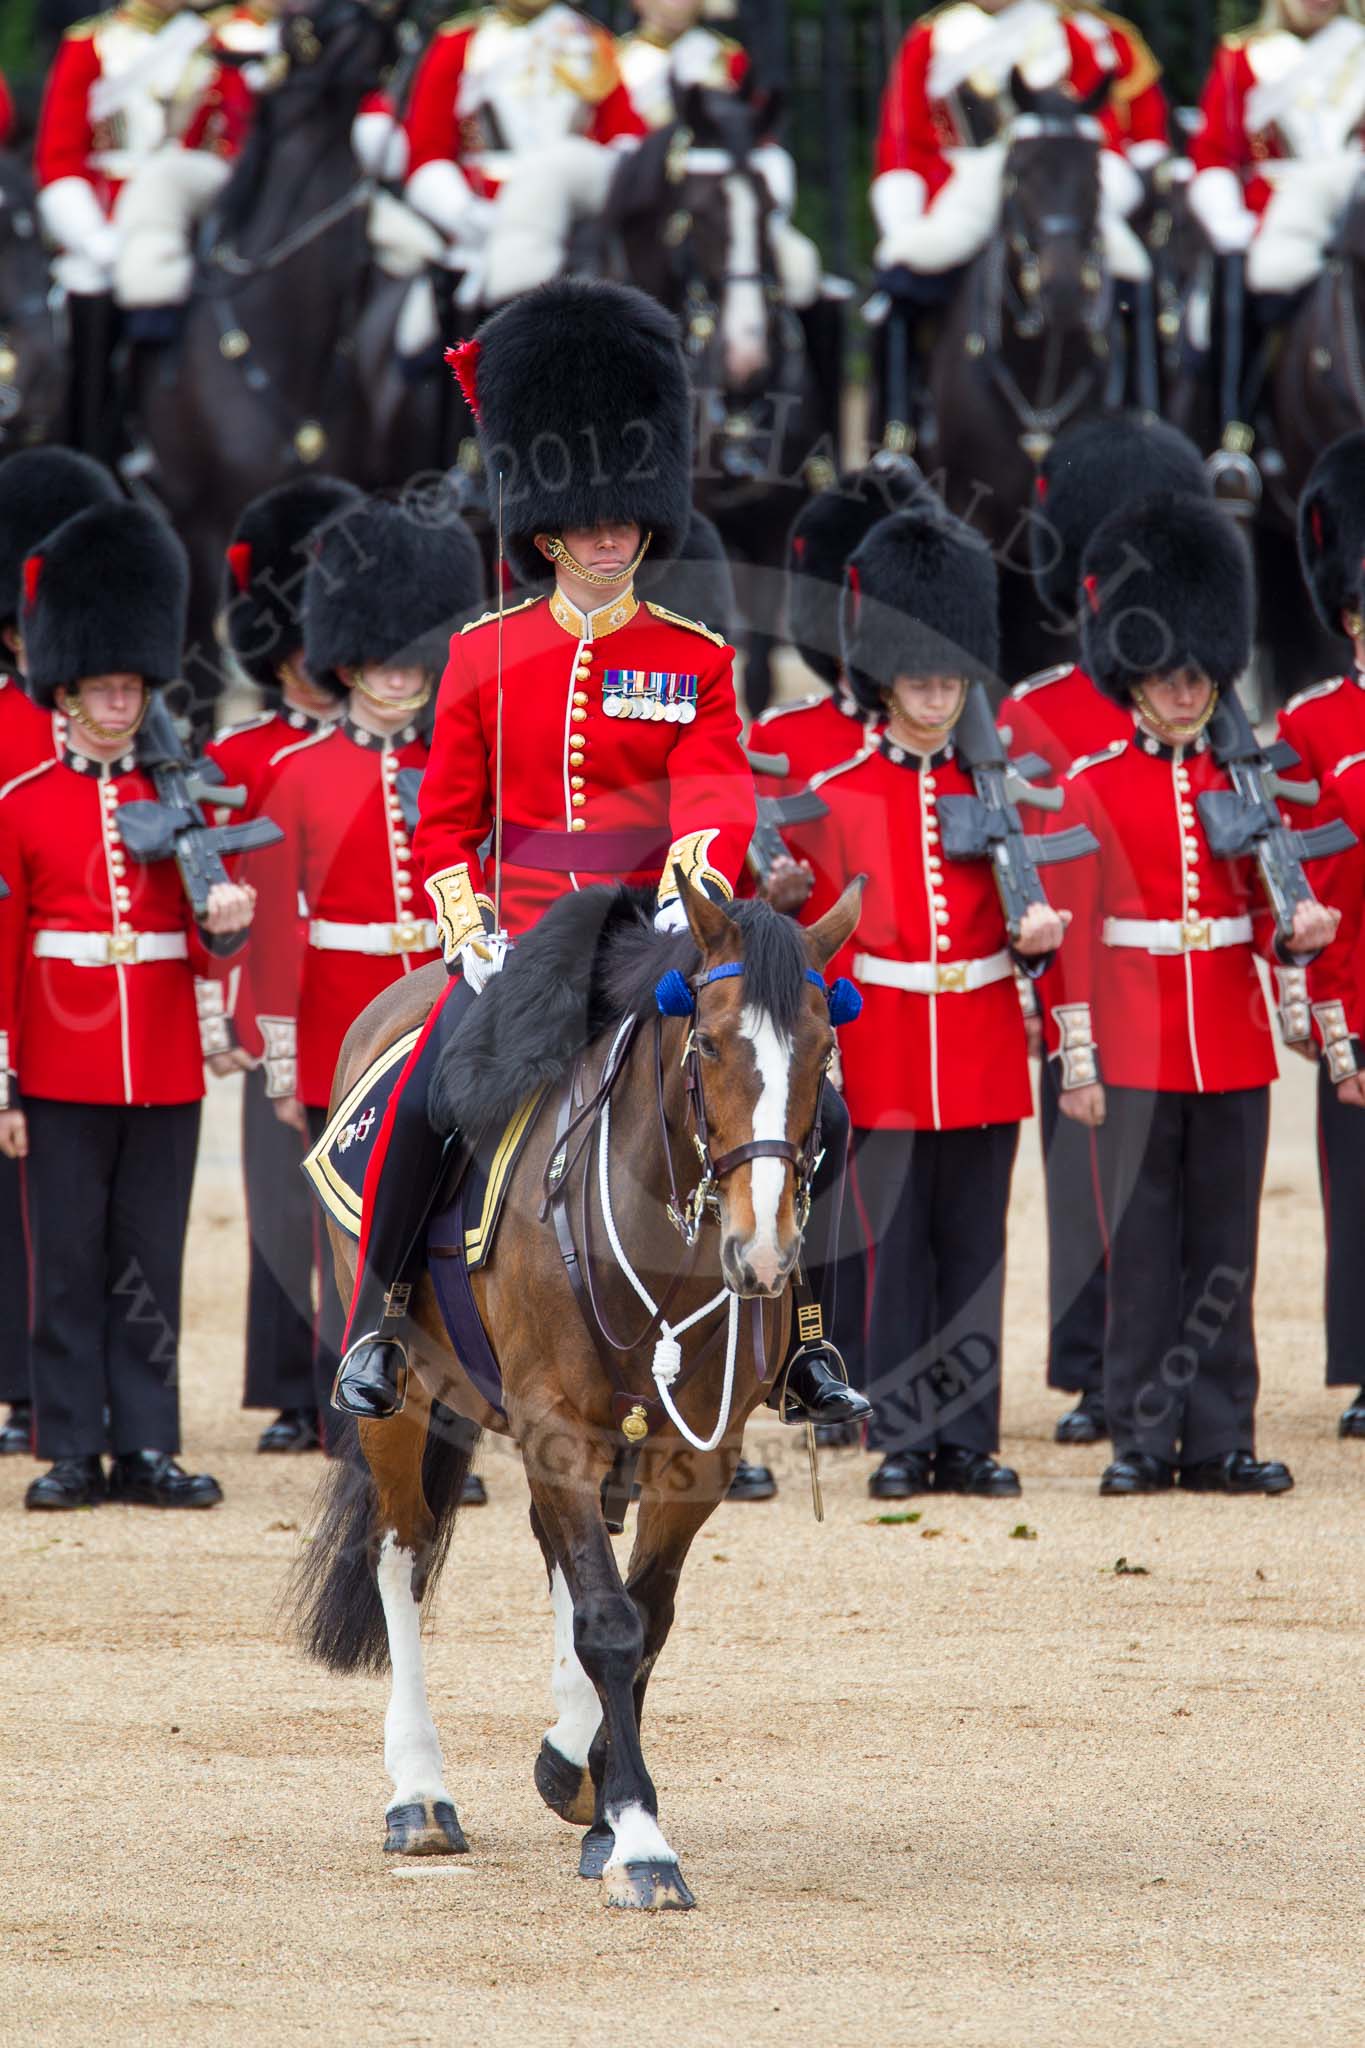 The Colonel's Review 2012: The Field Officer in Brigade Waiting, Lieutenant Colonel R C N Sergeant, Coldstream Guards, riding Burniston..
Horse Guards Parade, Westminster,
London SW1,

United Kingdom,
on 09 June 2012 at 11:17, image #263